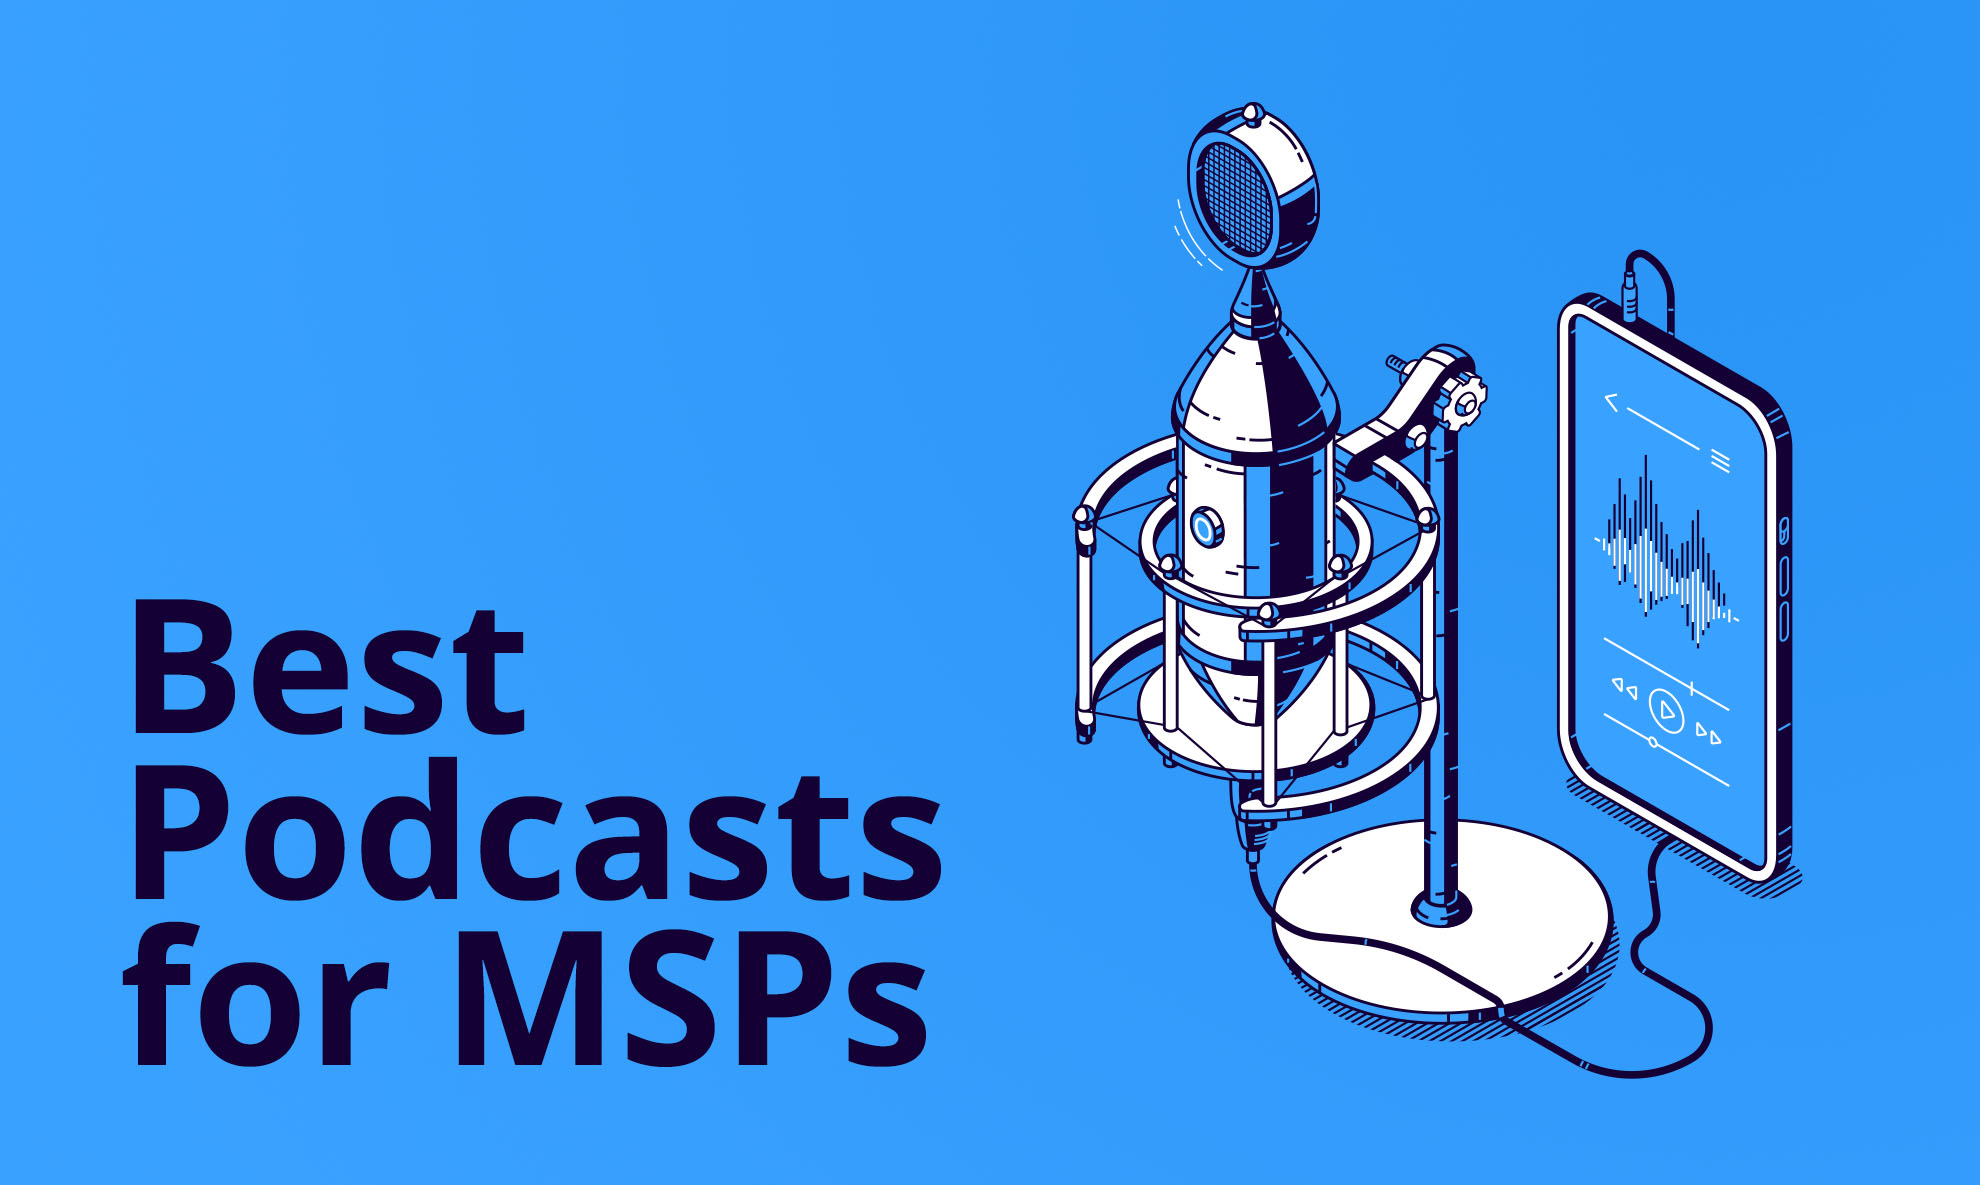 Best Podcast for MSPs